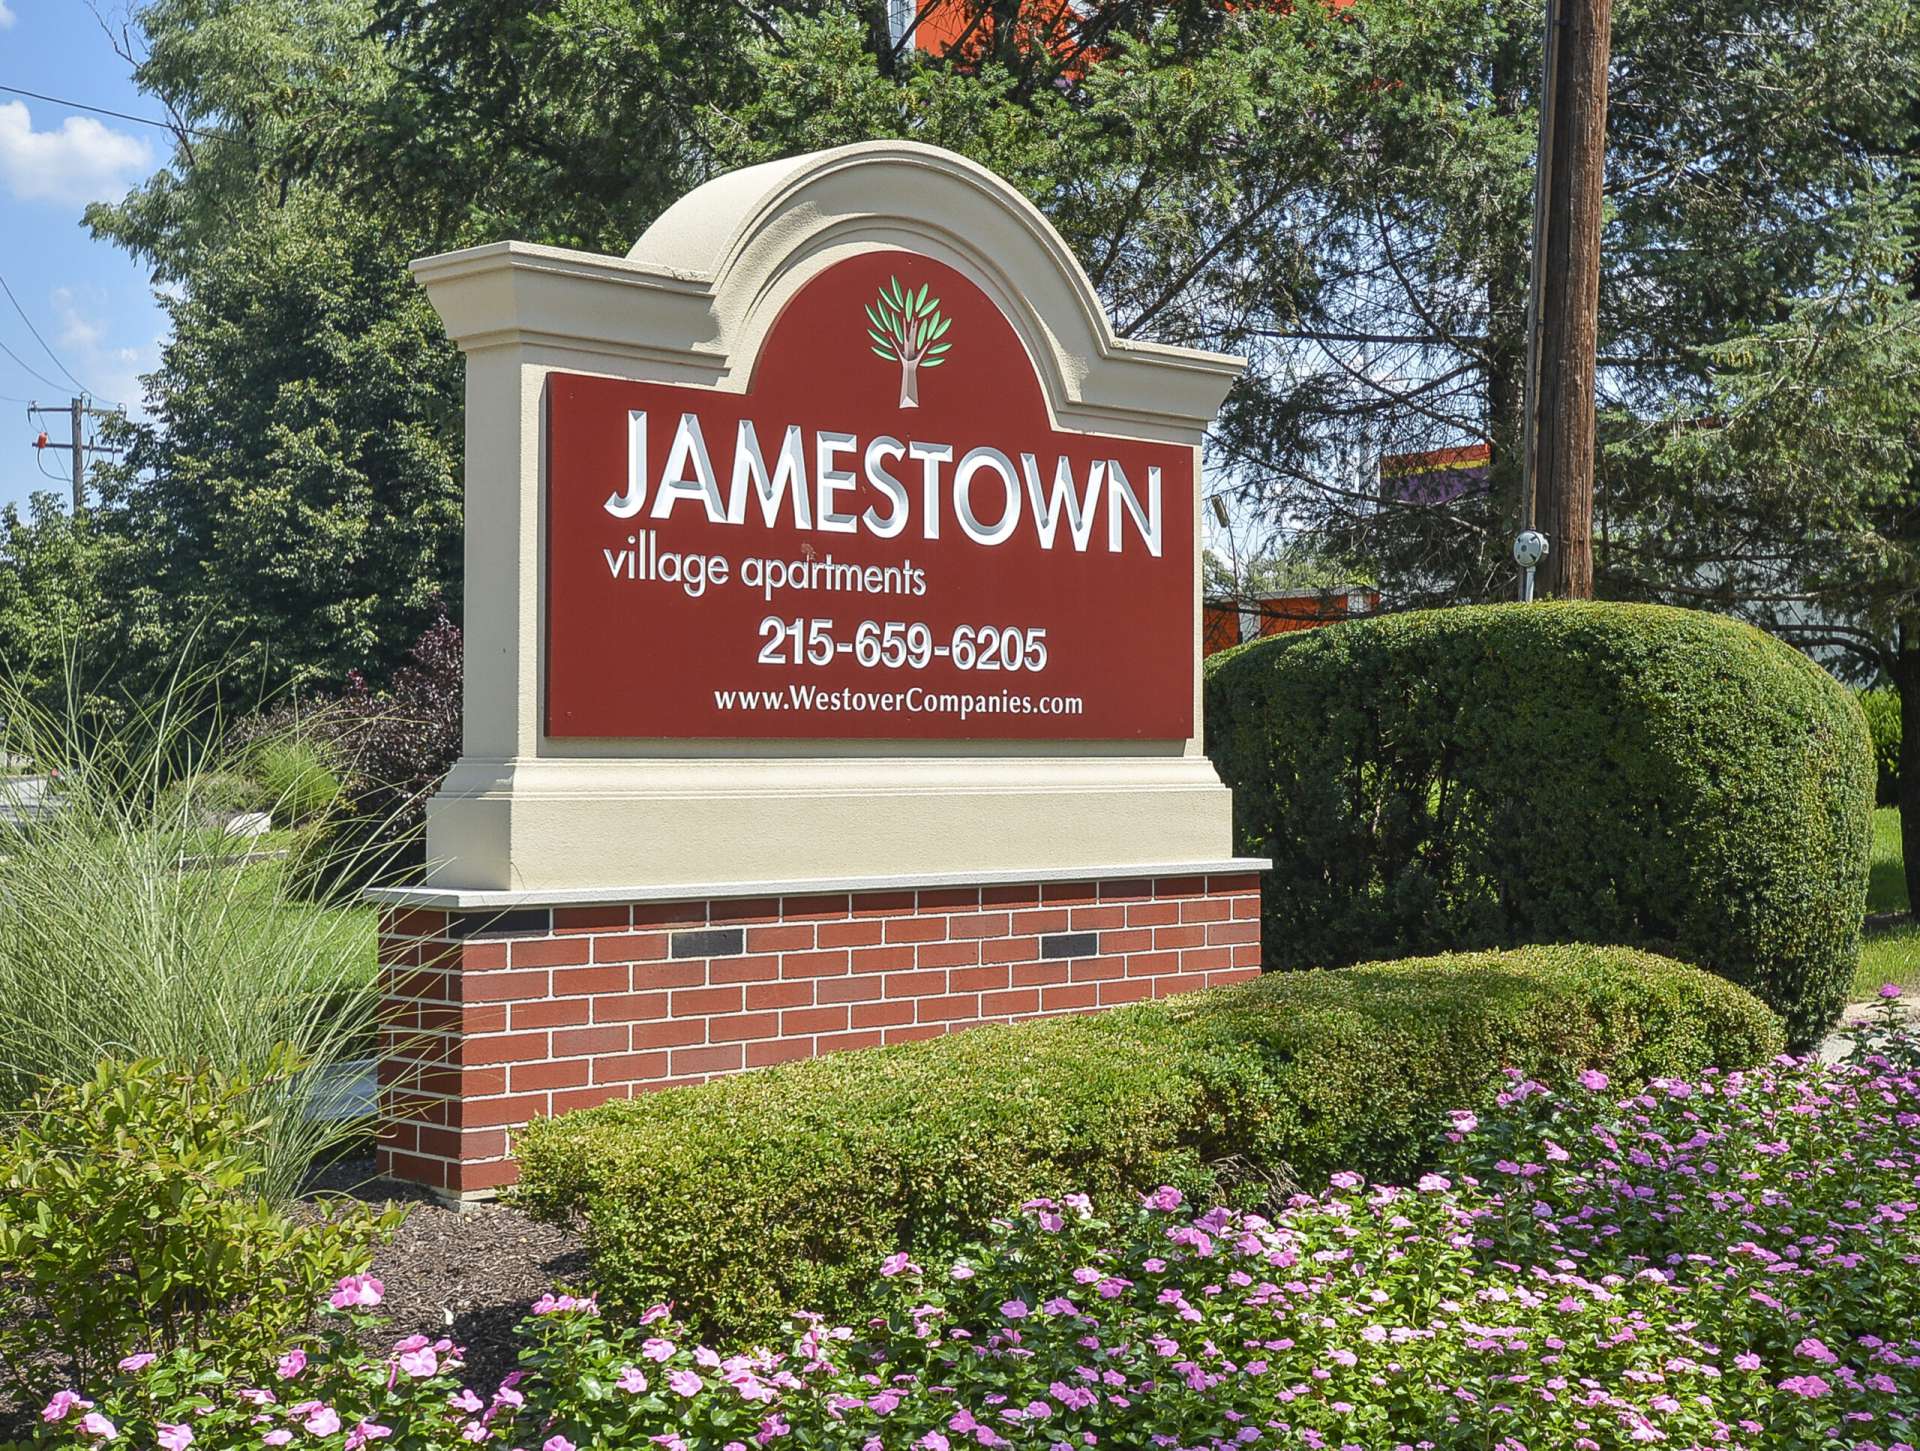 Jamestown Village Apartments sign with flowers and various bushes around the sign.